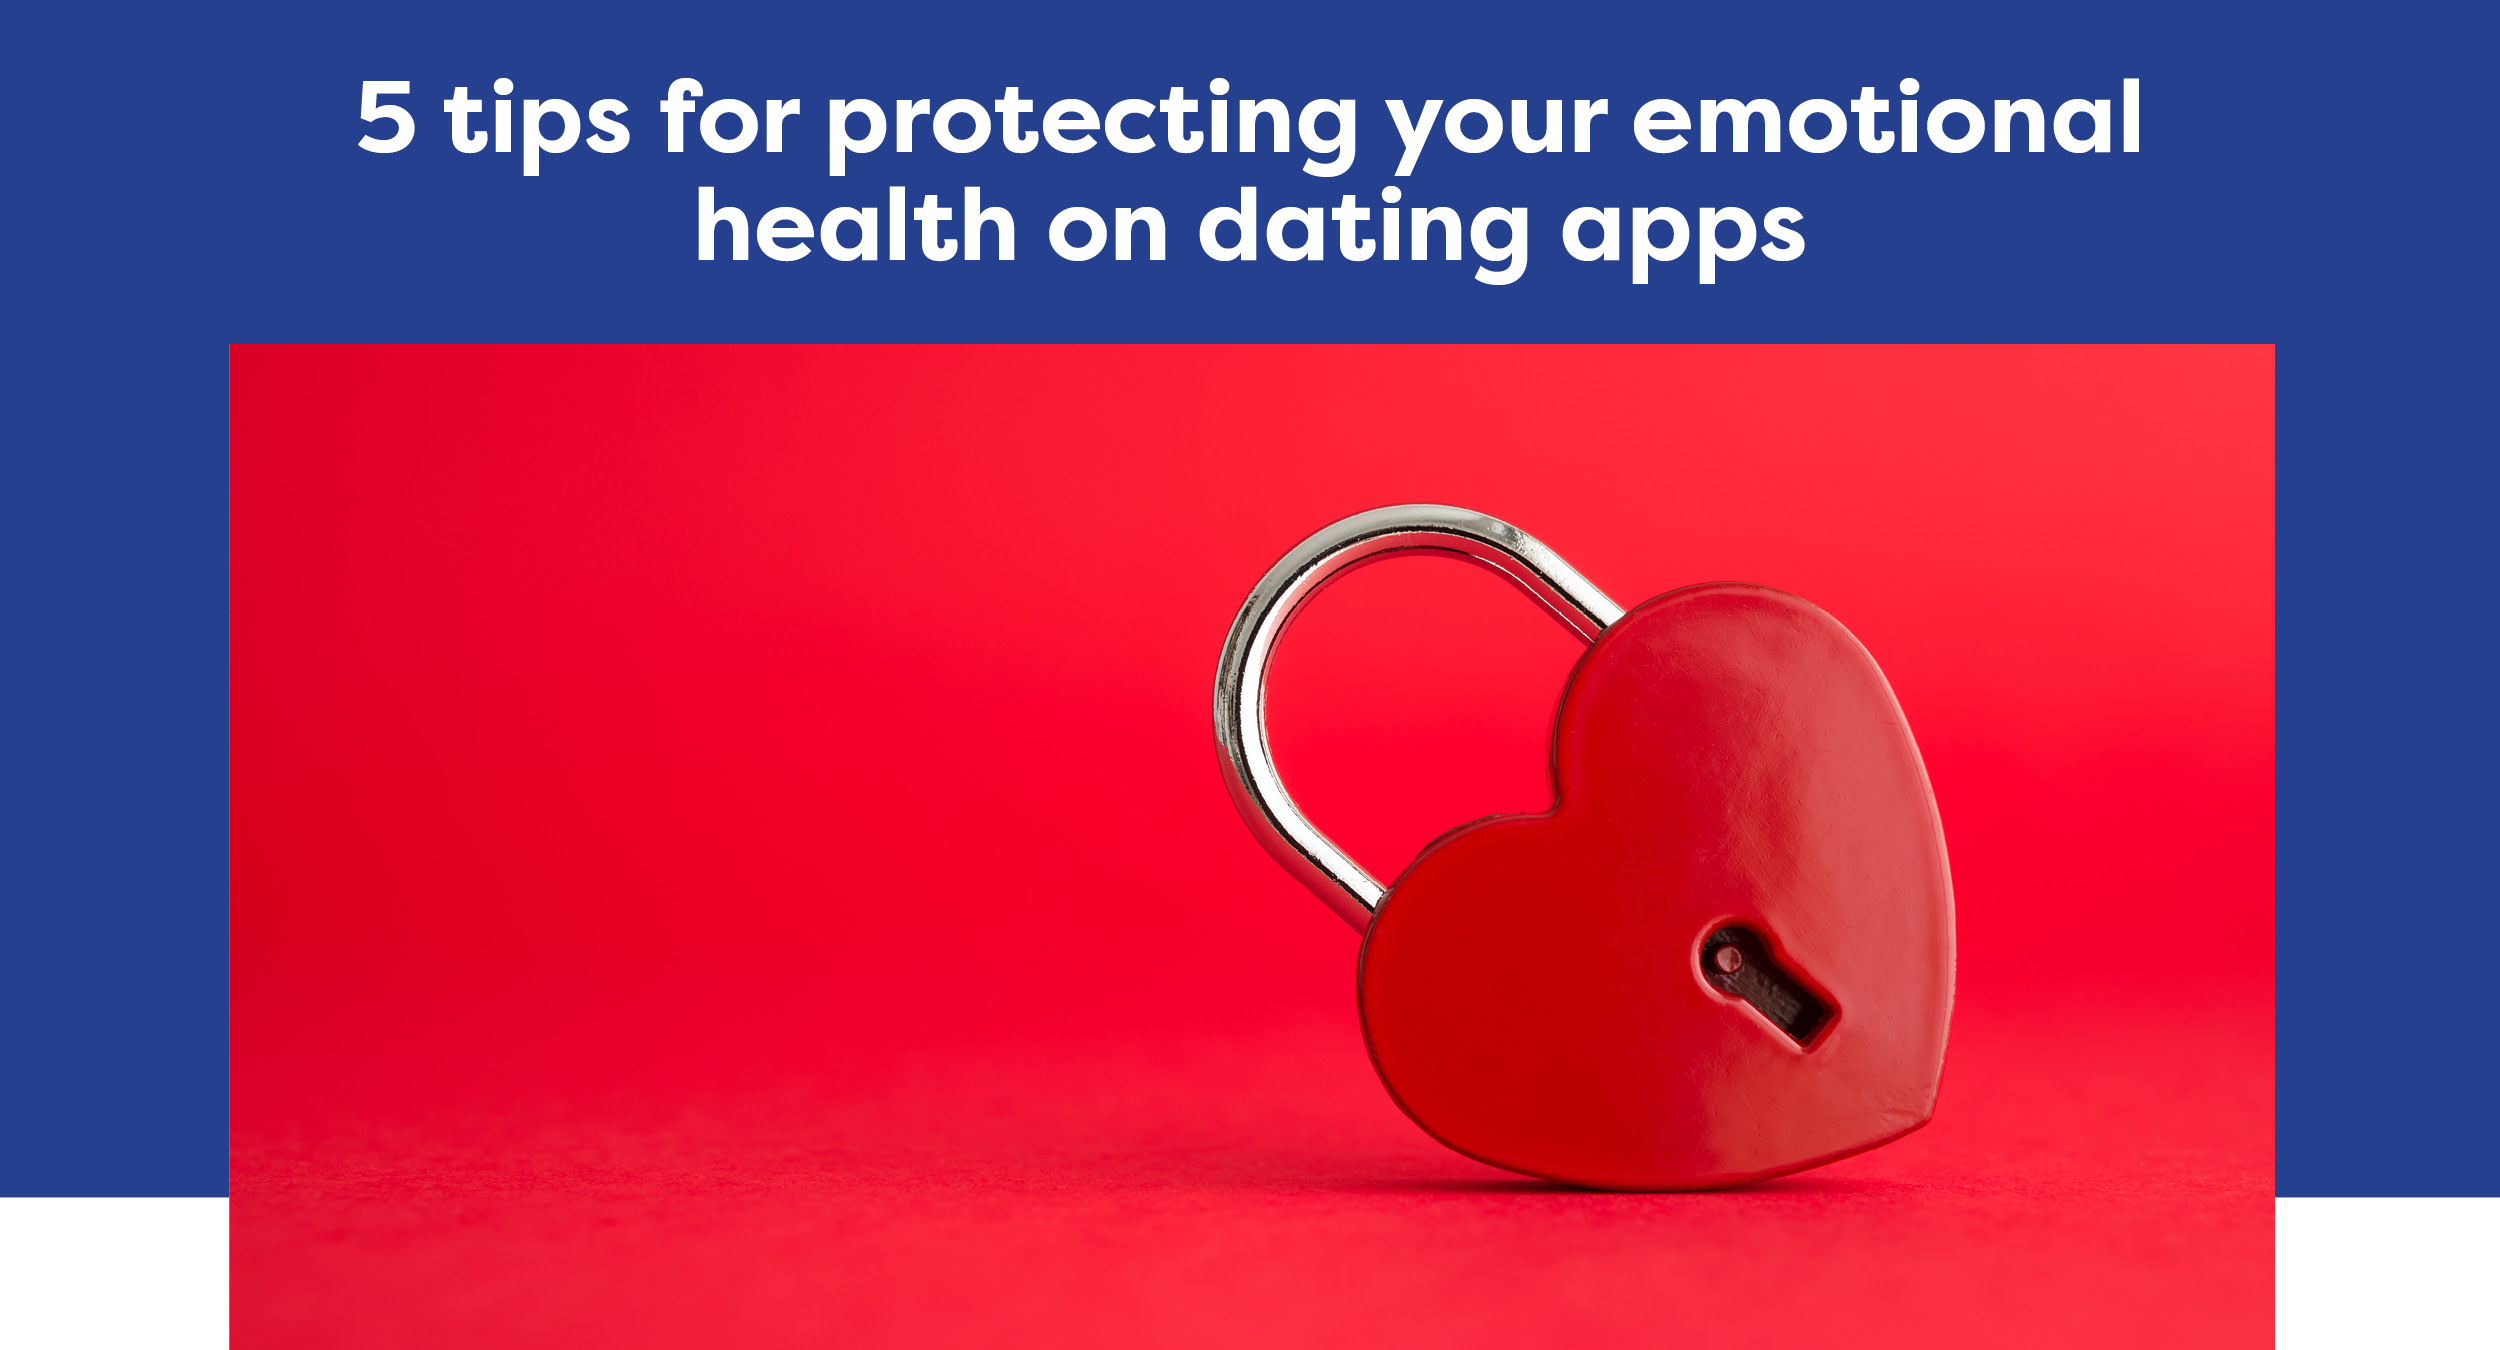 5 tips for protecting your emotional health on dating apps